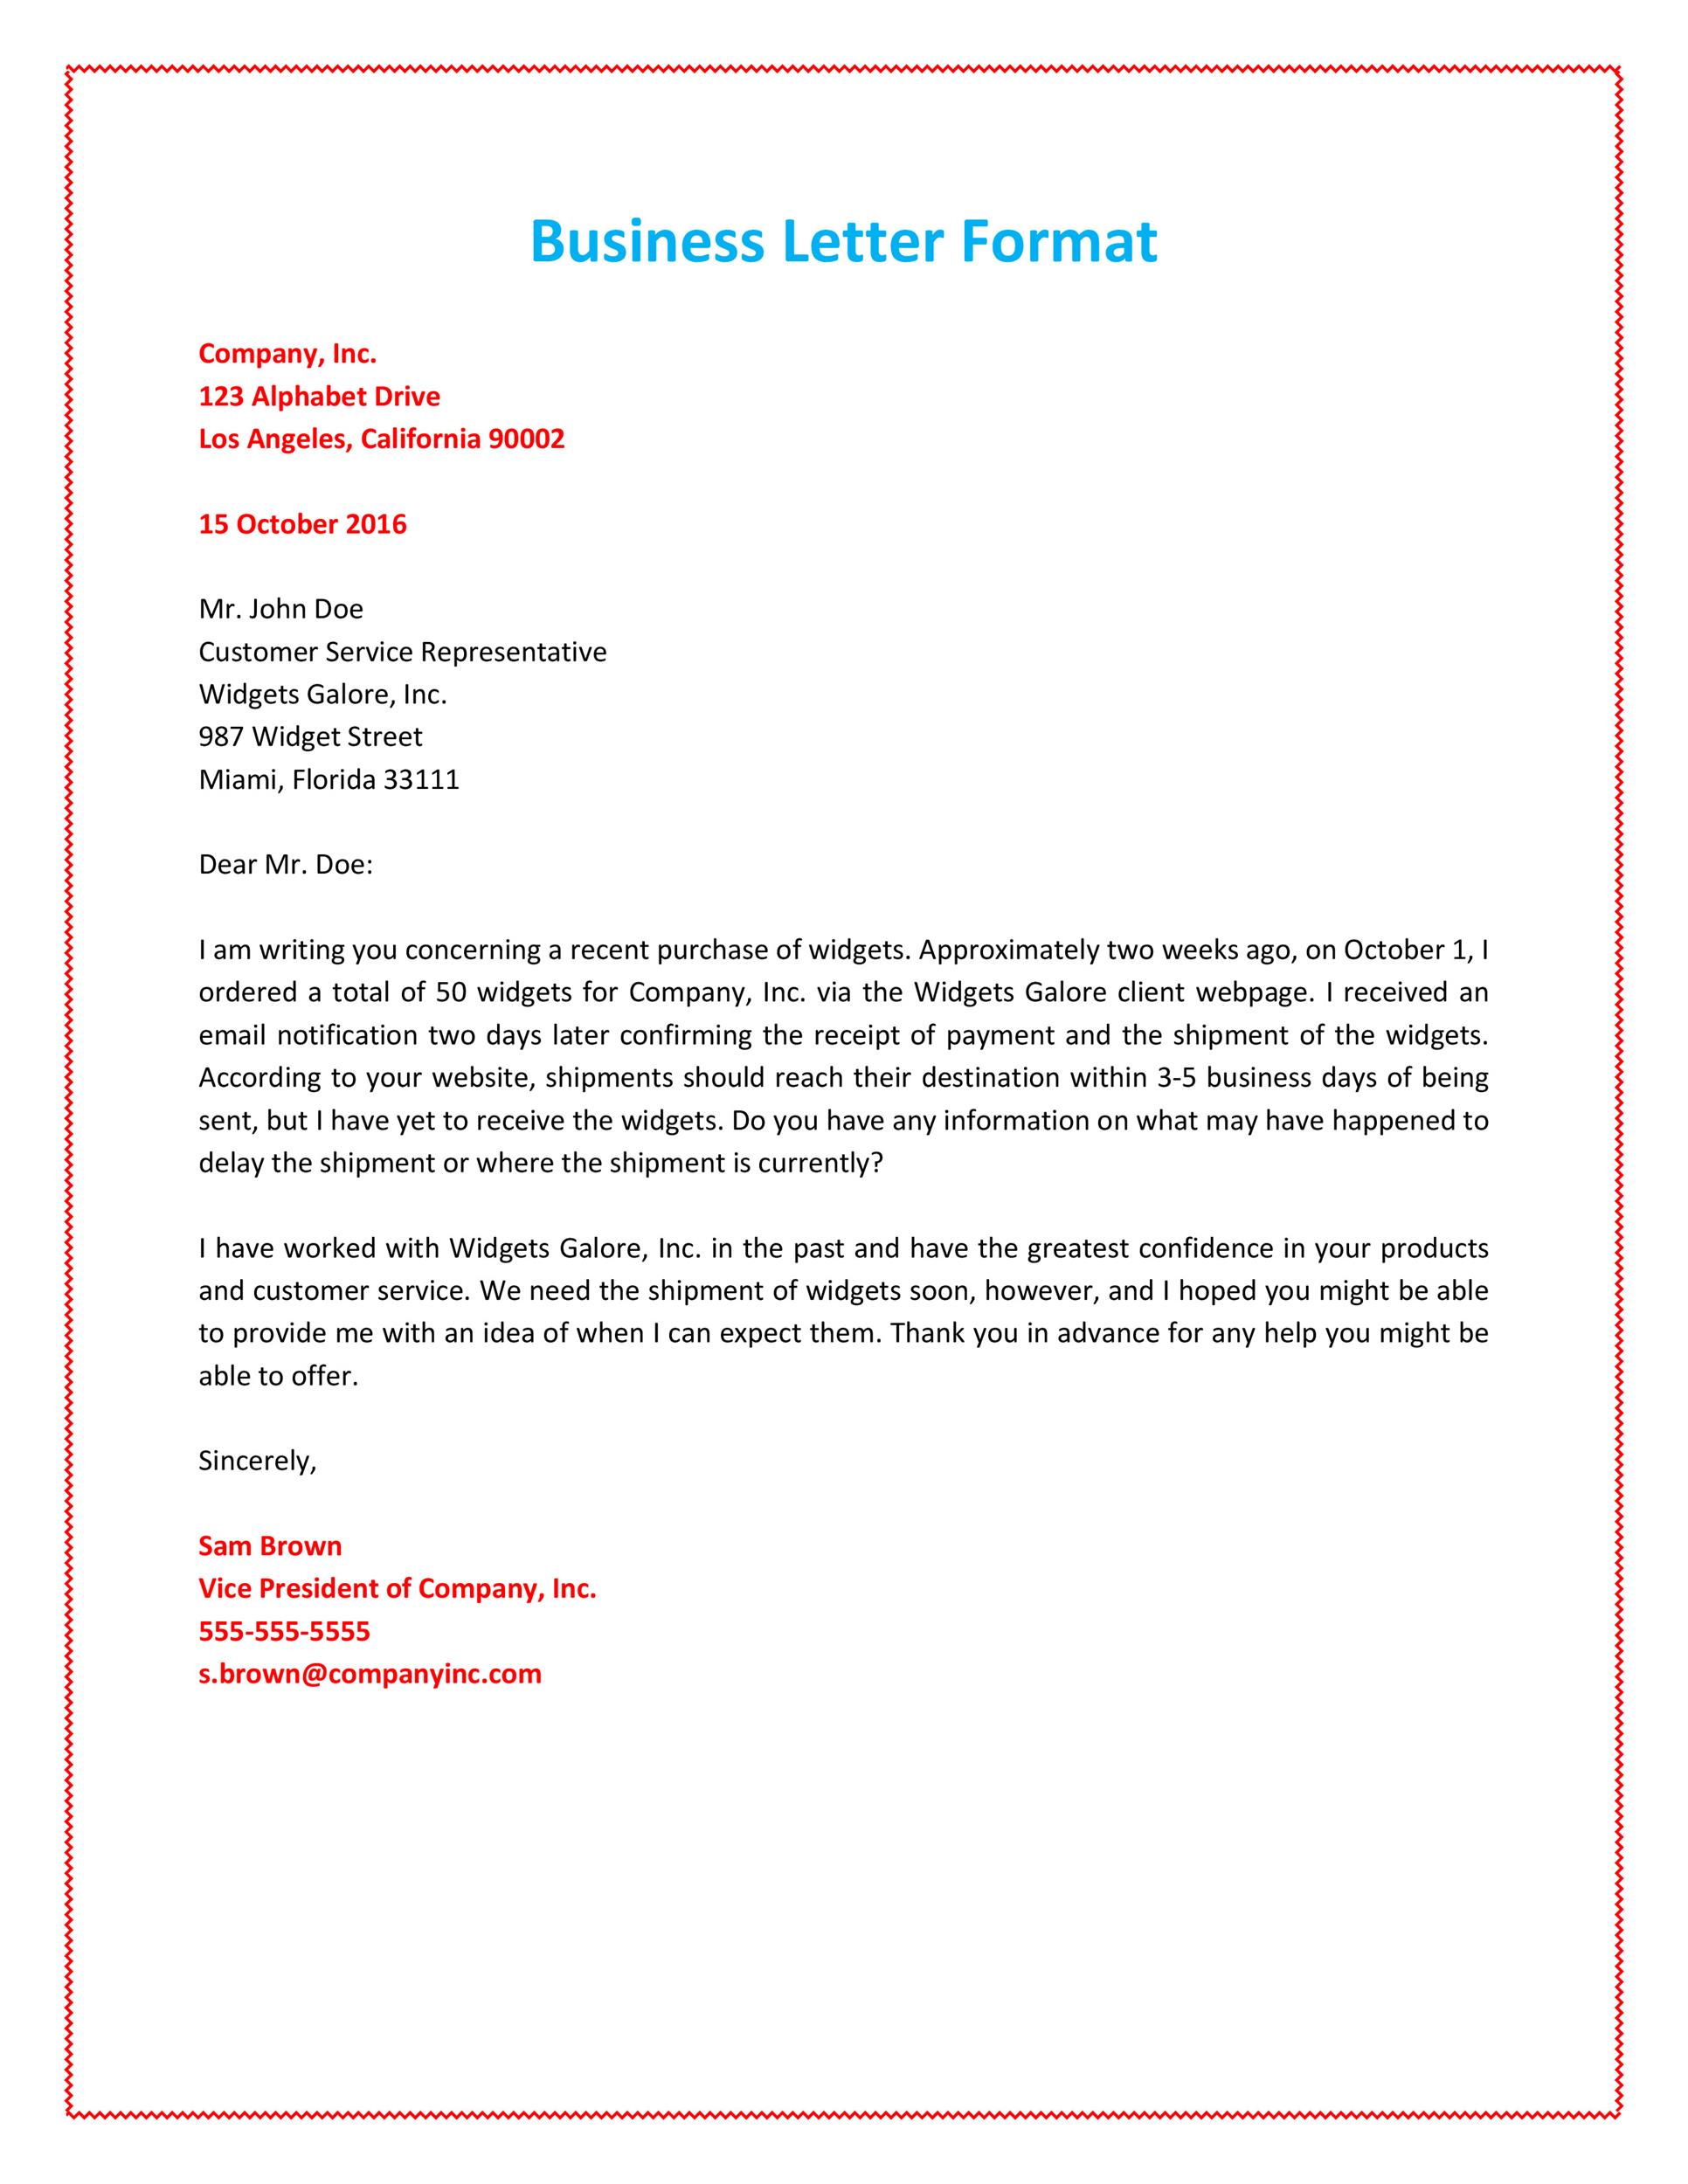 Sample Business Letters